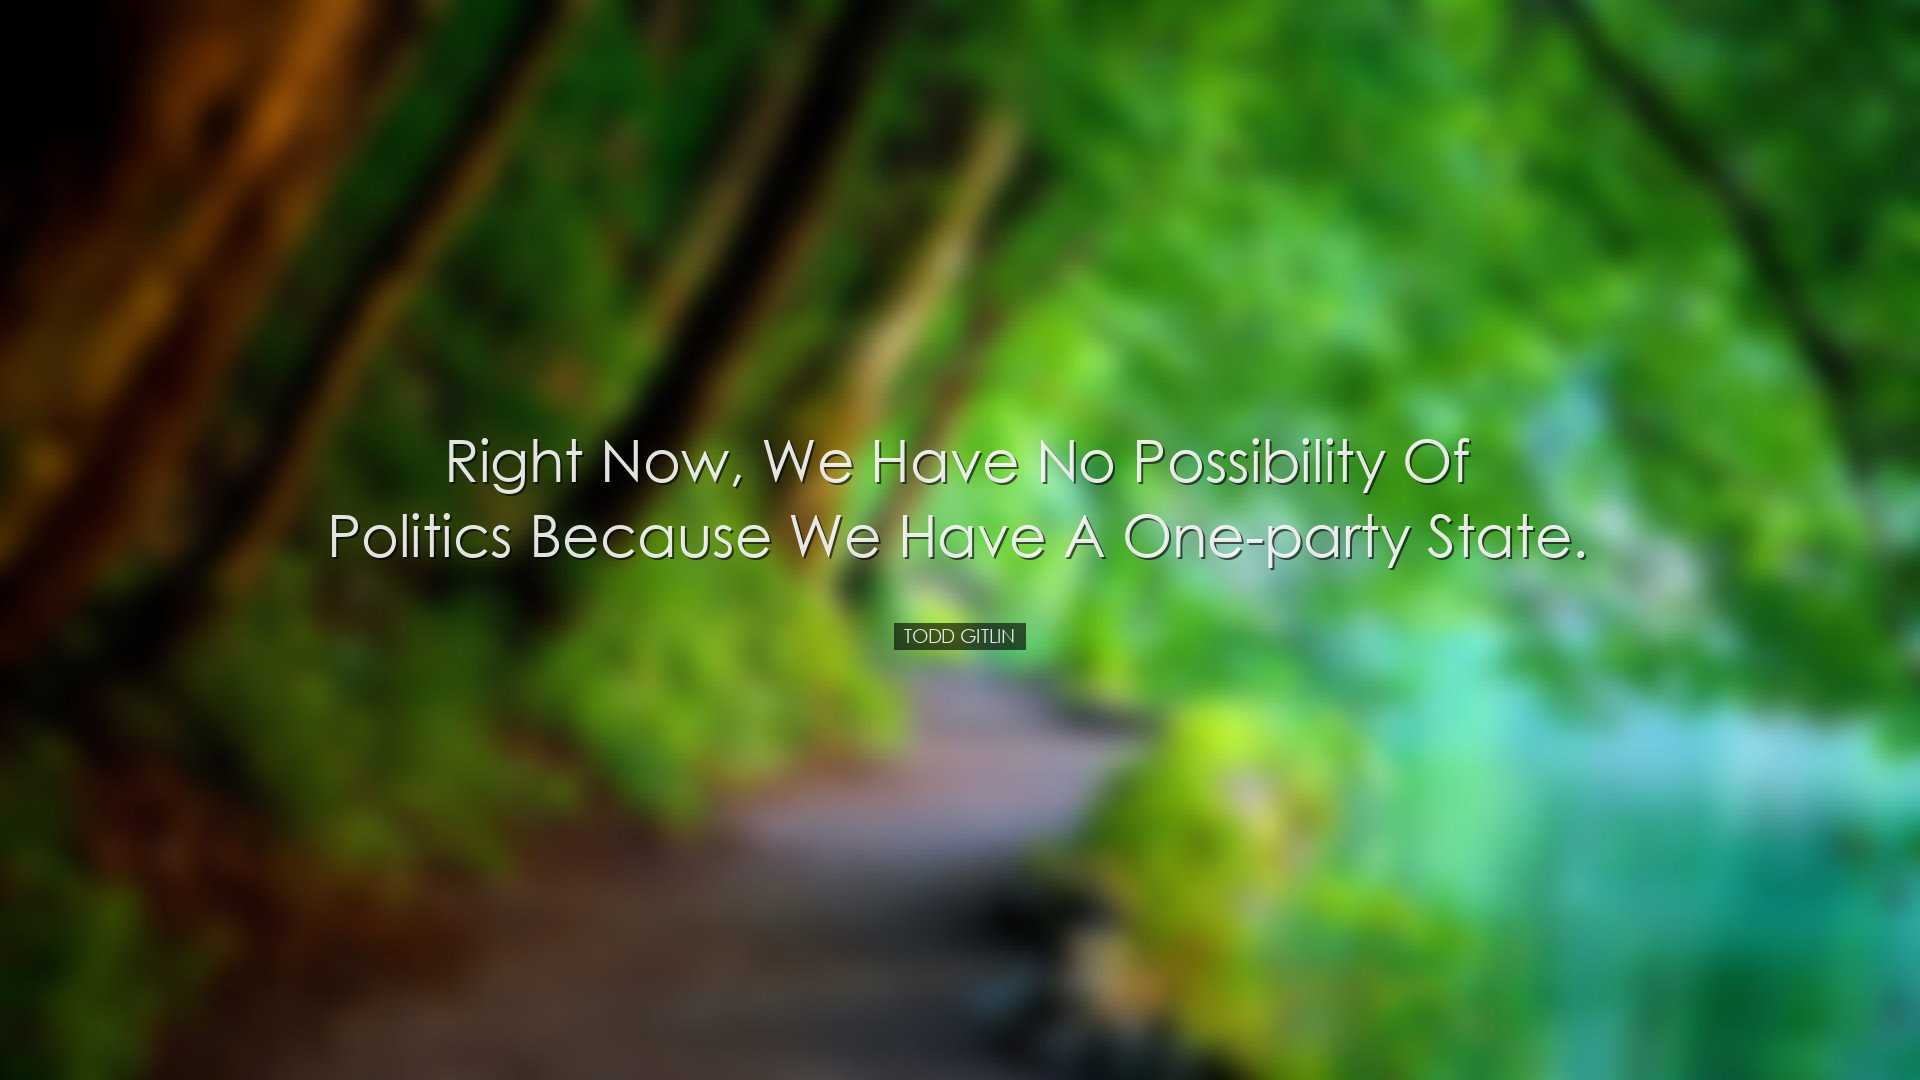 Right now, we have no possibility of politics because we have a on